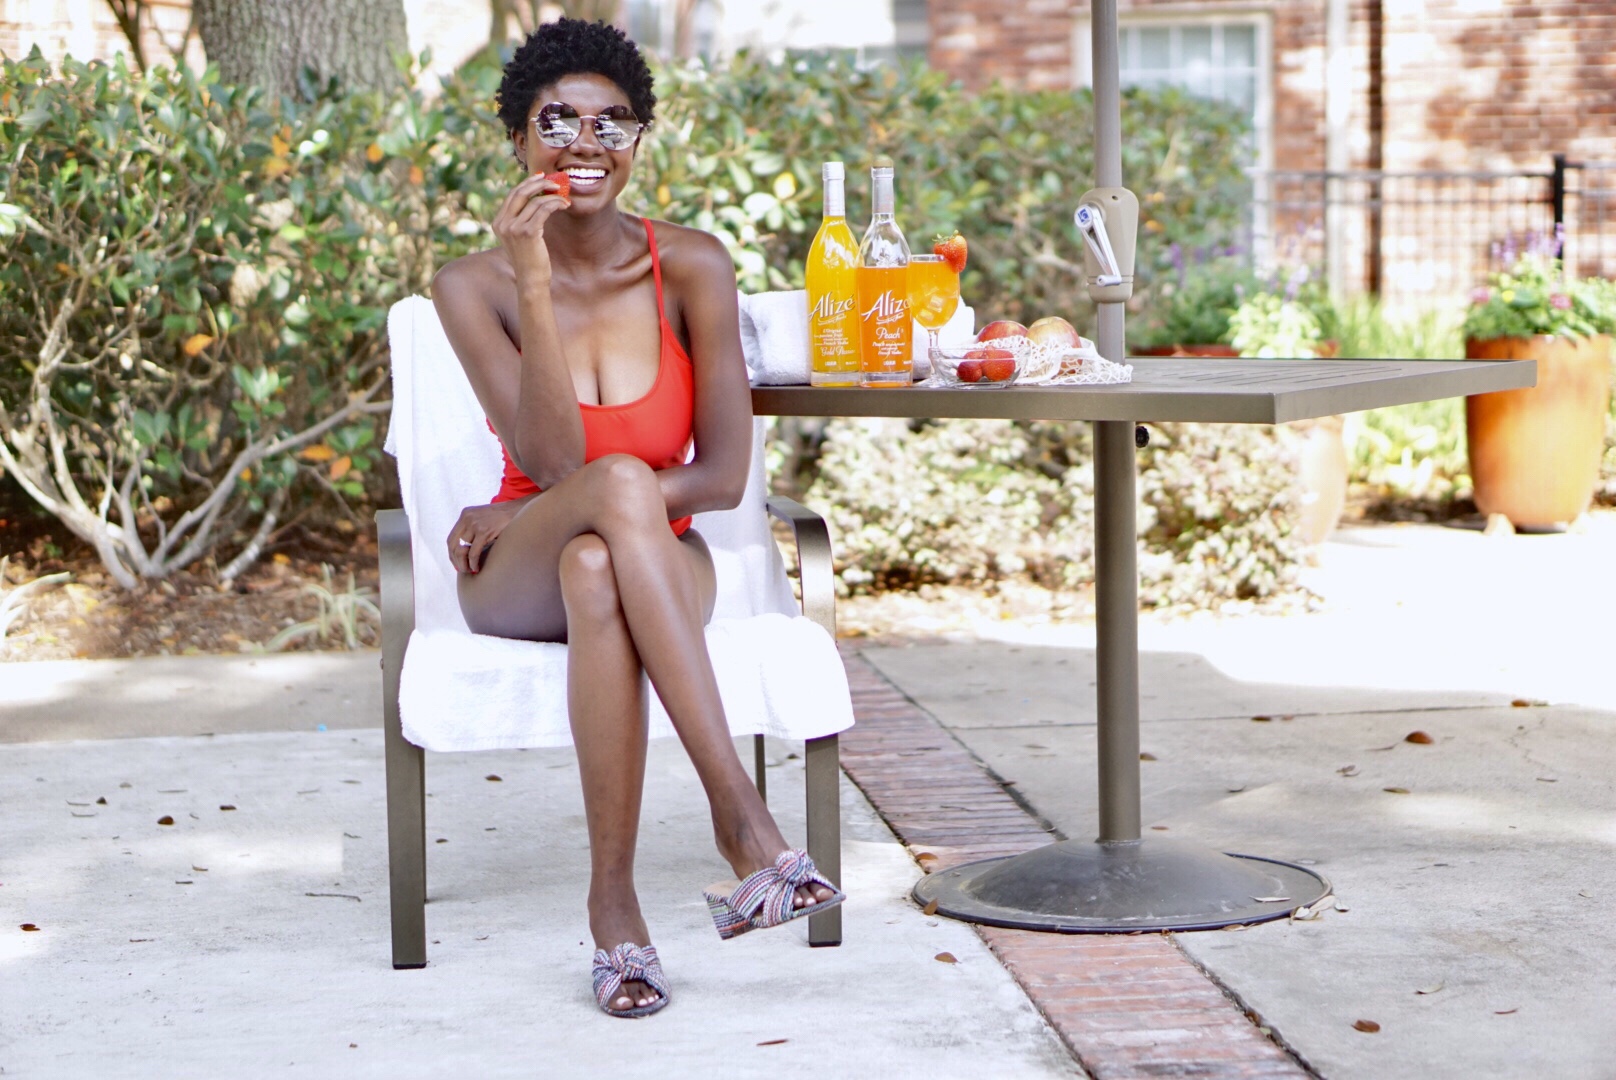 Summer Cocktails, easy summer cocktails, Alize, Alize recipes, fruity cocktails, fruity drinks, twa, dark skin girl, red swimsuit, short natural hair, pool side, relax by the pool, pool inspo